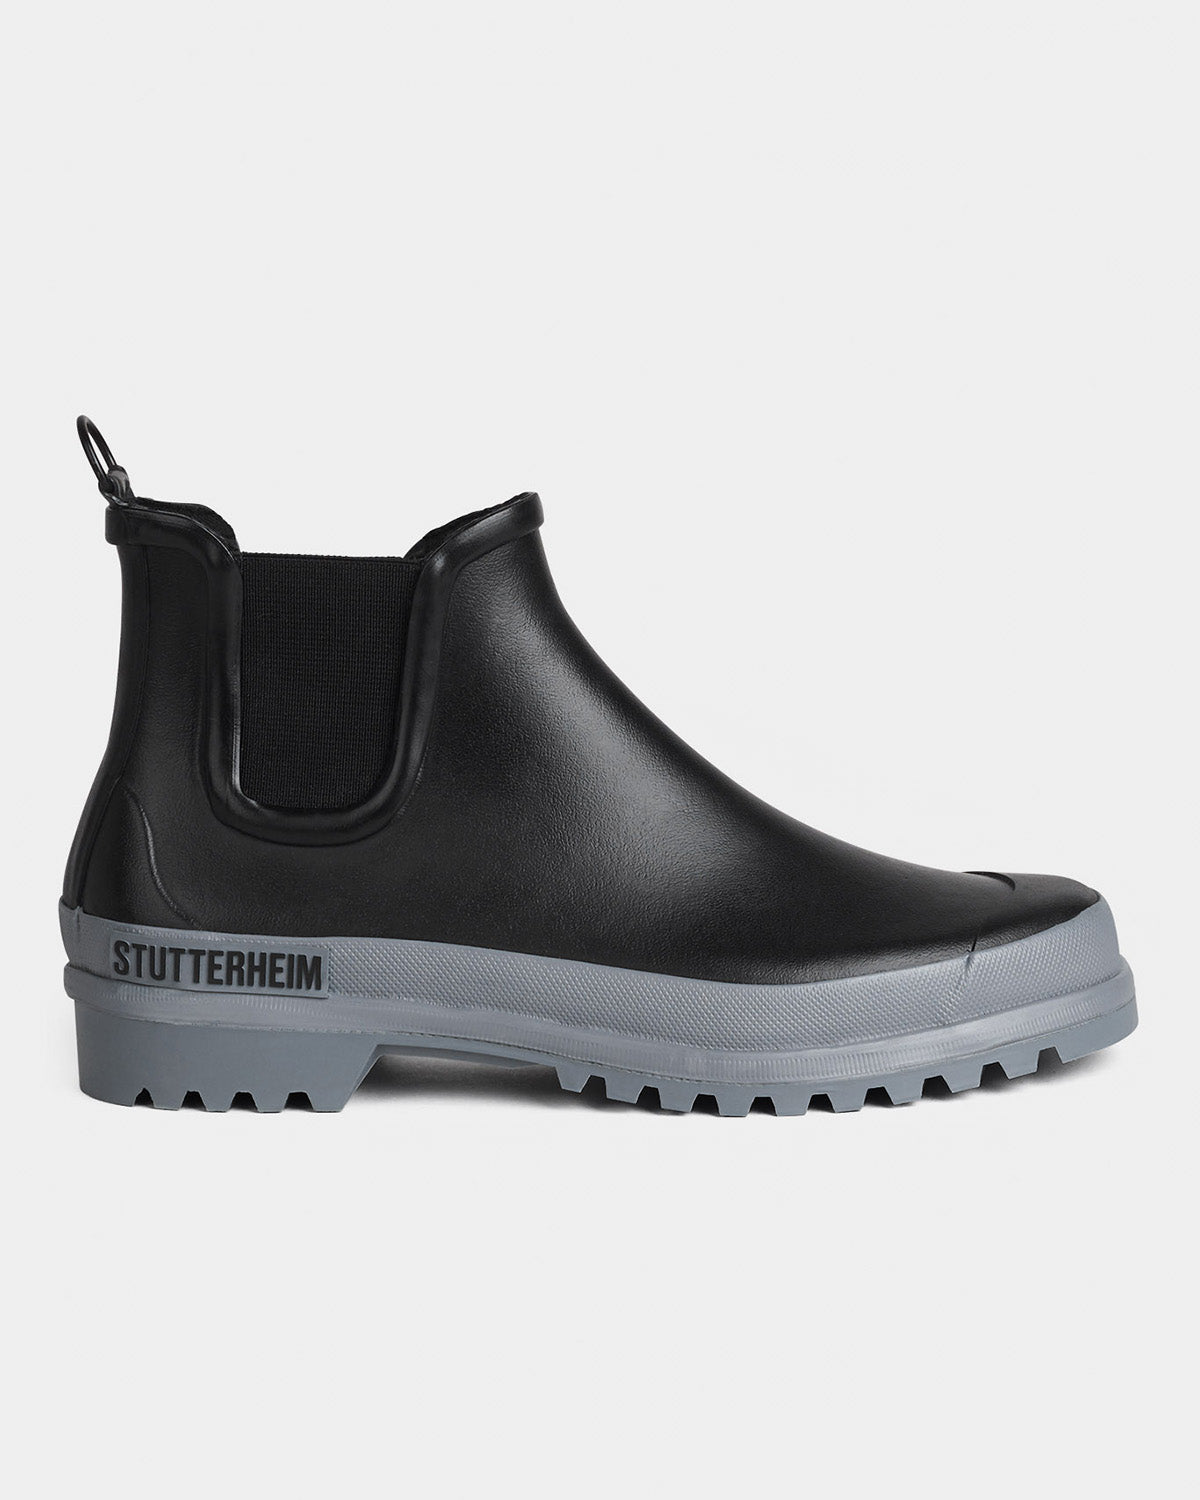 Chelsea Rainboots in color black with grey sole by Ilse Jacobsen